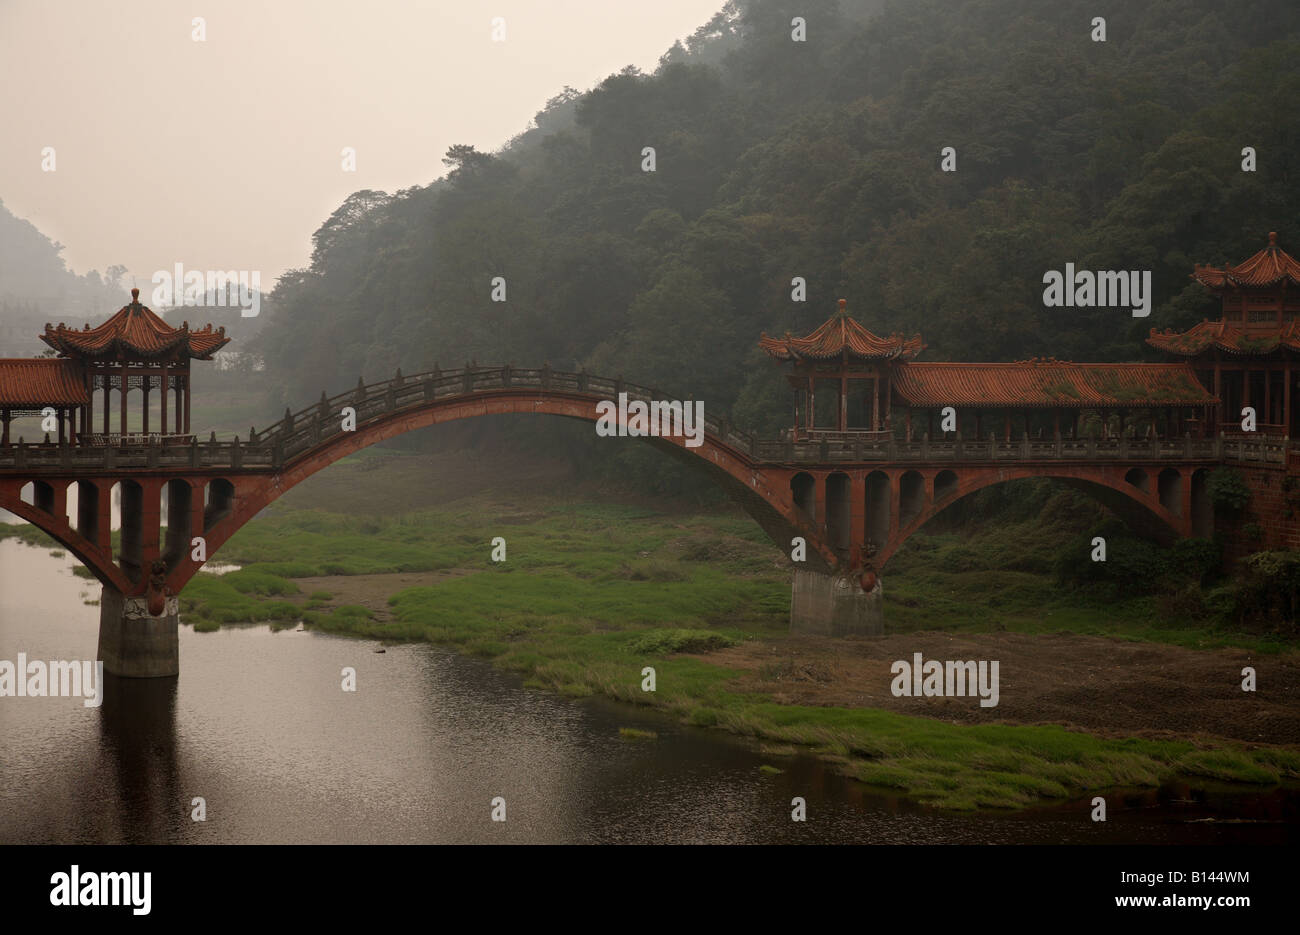 A Chinese bridge over a river in Leshan close to the Giant Buddha tourist attraction Stock Photo